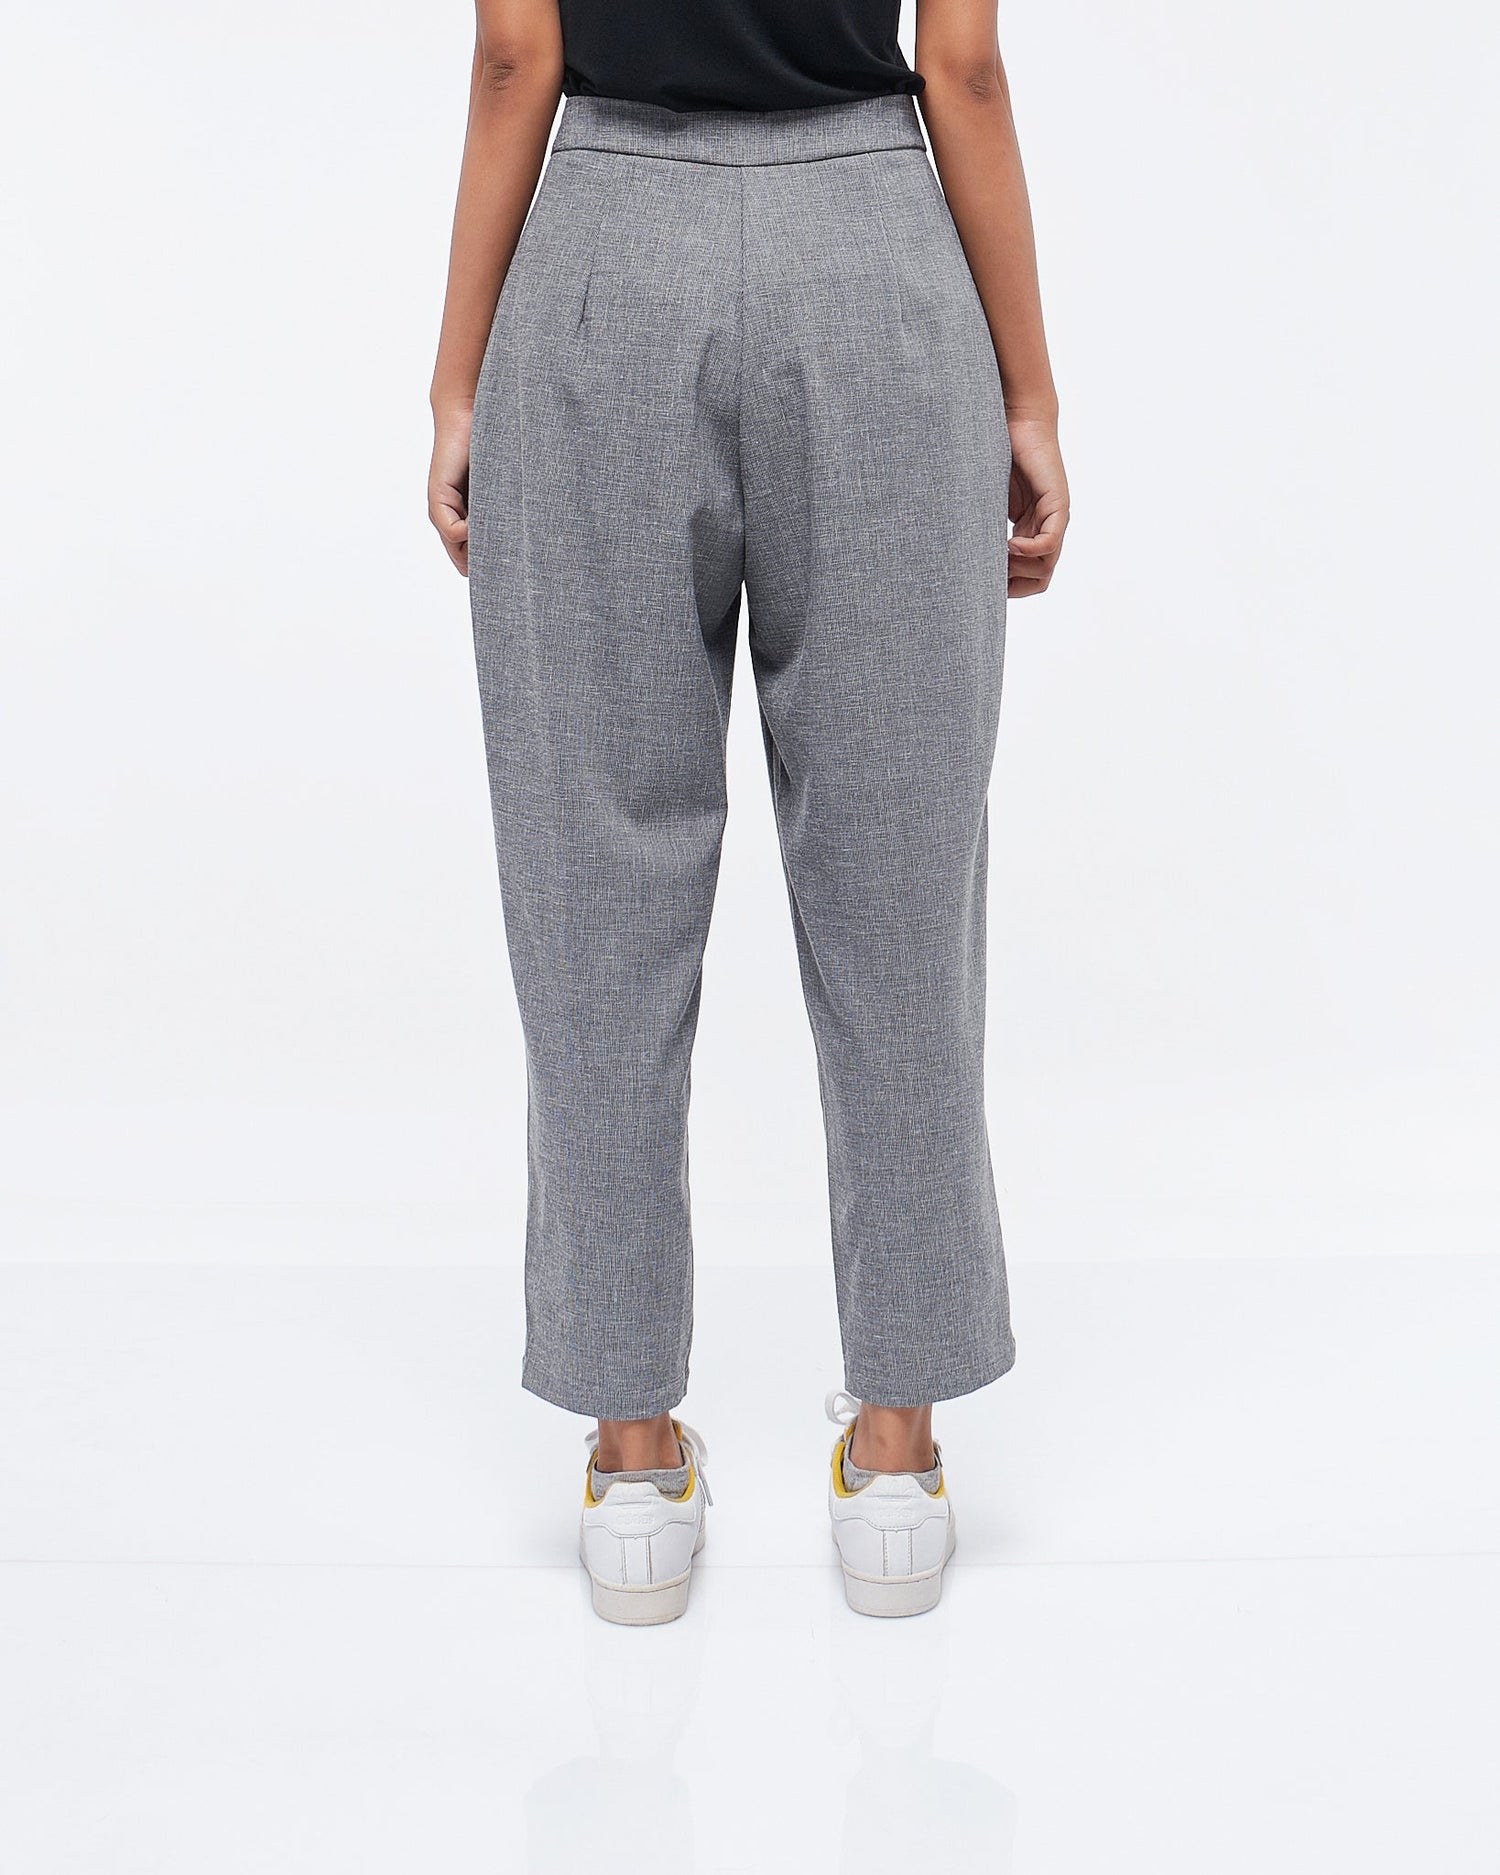 MOI OUTFIT-Loose Fit Lady Pants 16.90